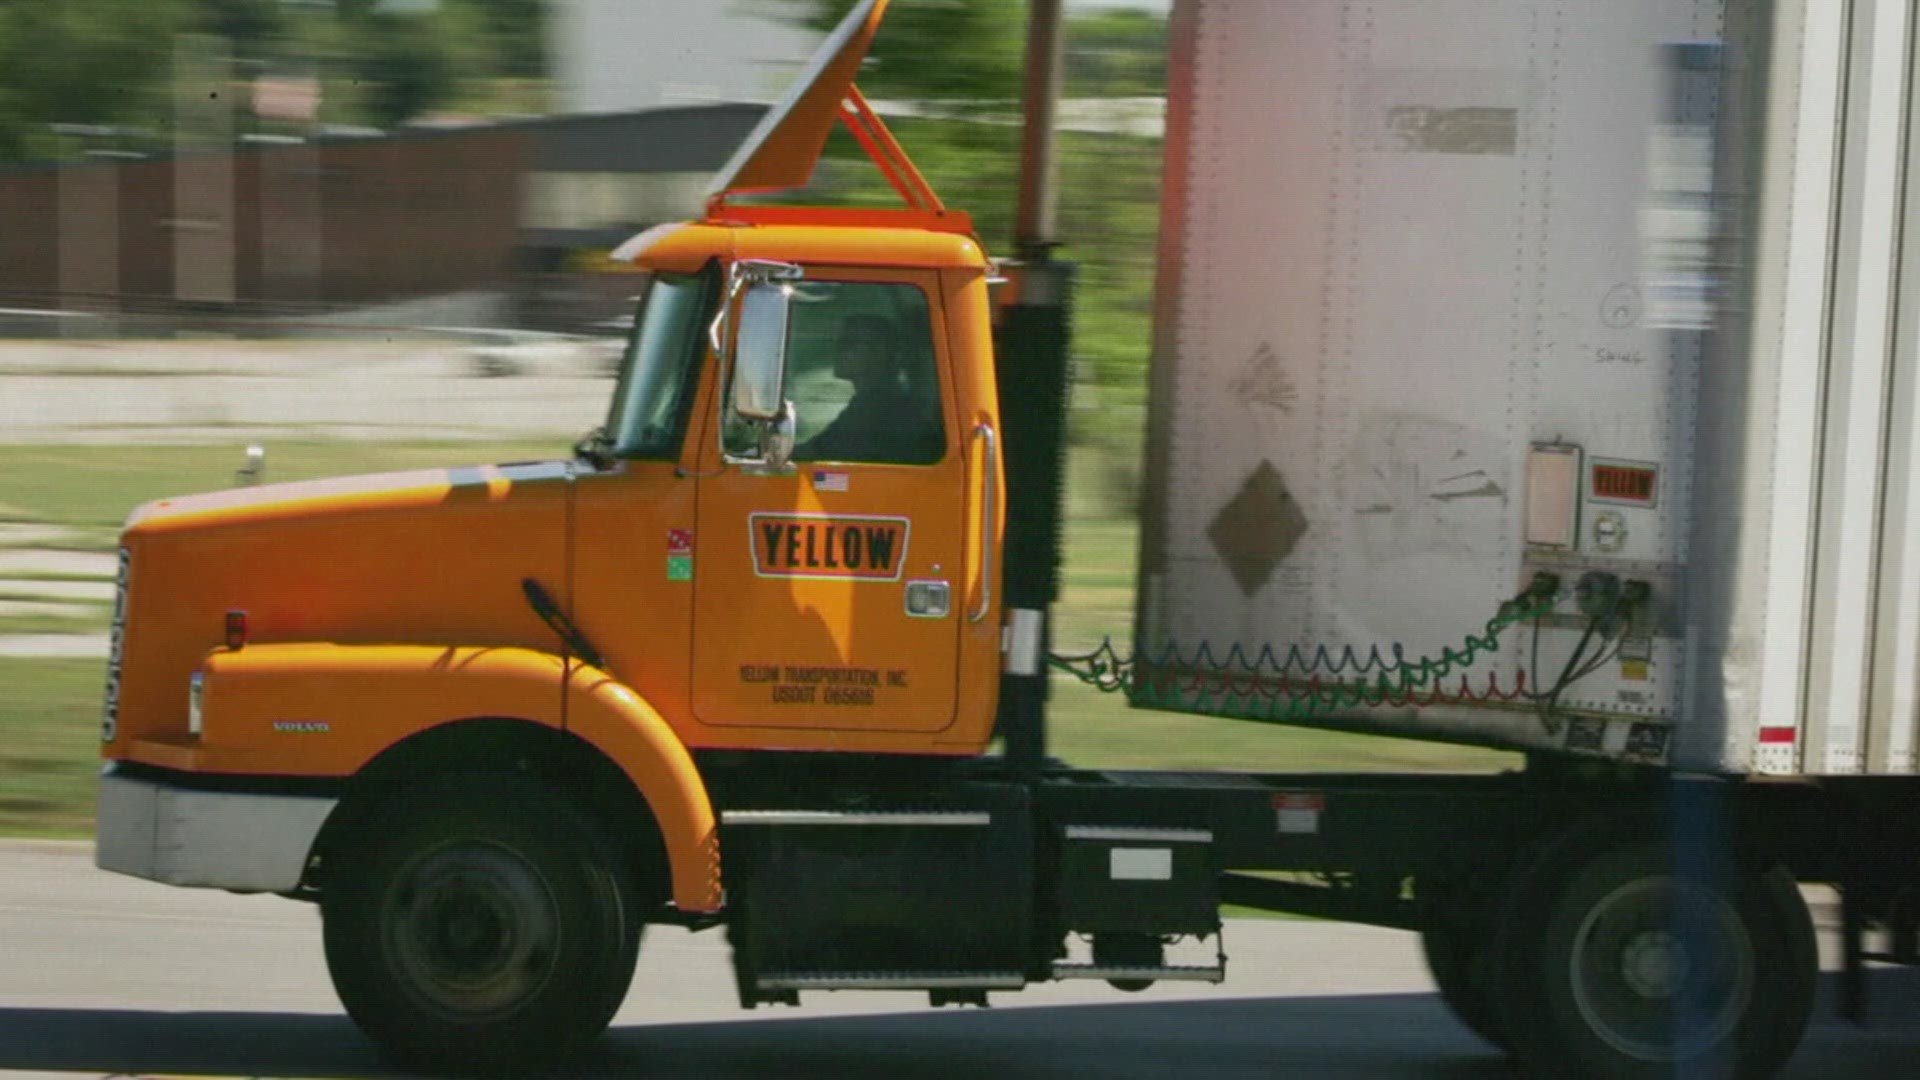 After years of financial struggles, U.S. trucker Yellow Corp. is reportedly preparing for bankruptcy and seeing customers leave in large numbers.